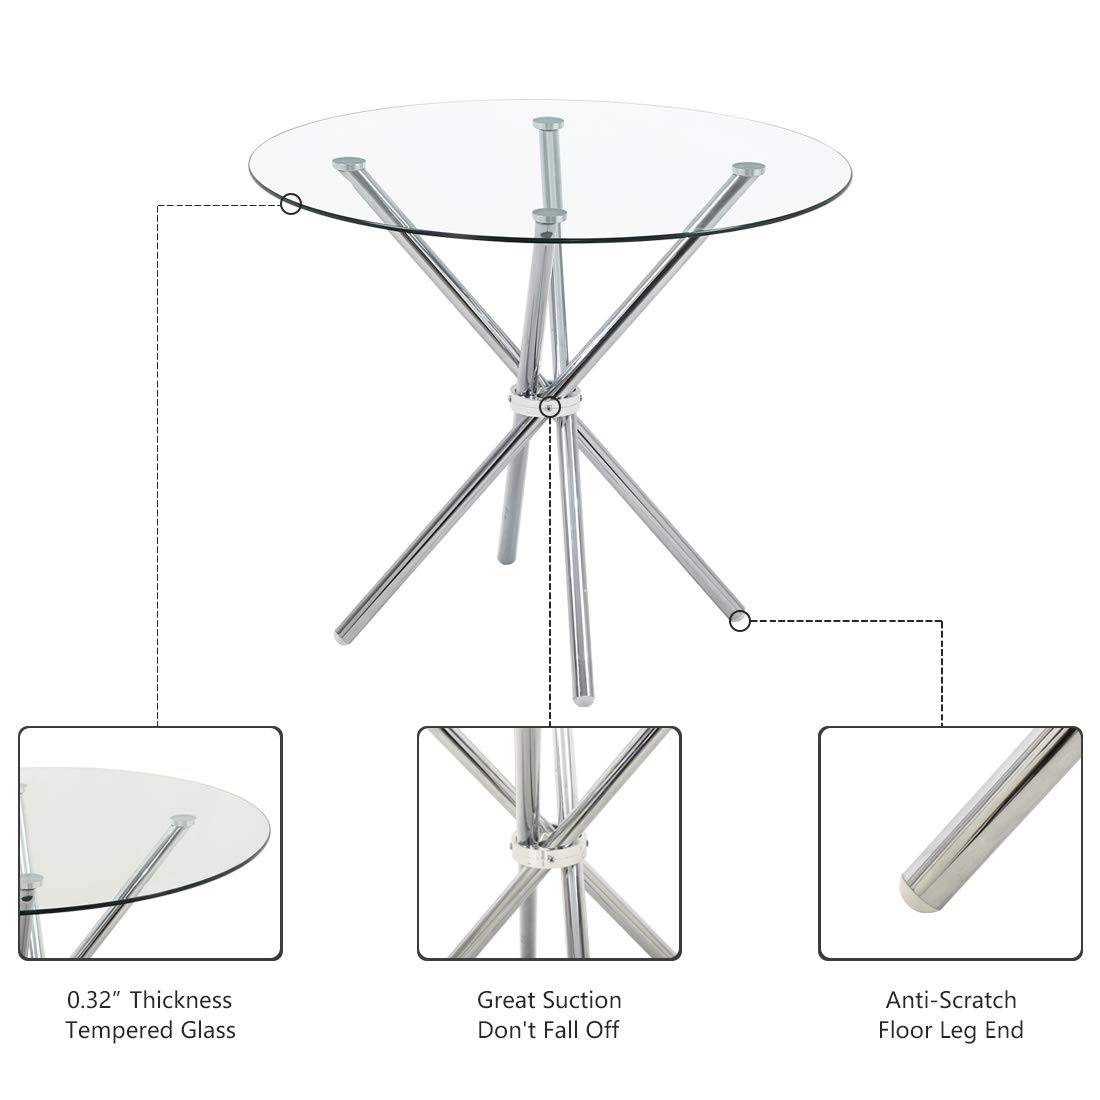 Modern Round Dining Table with Clear Tempered Glass Top, 4 Chrome Legs Kitchen Table for 2 or 4 Person,Round Dining Table Furniture for Home Office Kitchen Dining Room(W 35.4 x L 35.4 x H 29.5 inch)